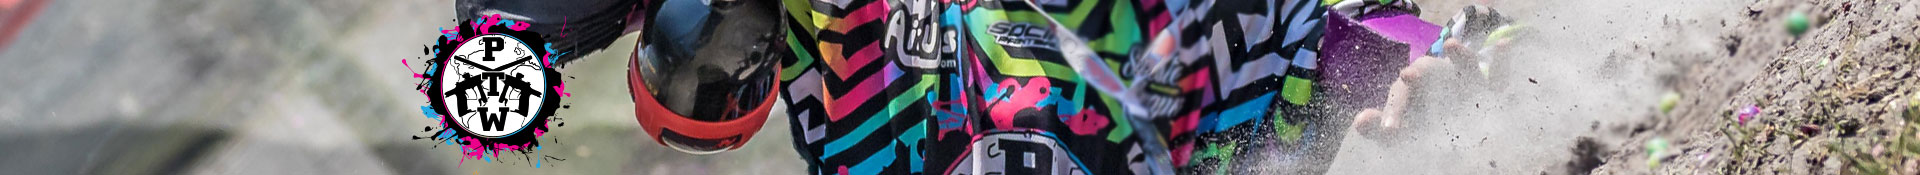 PTW Painting The World Paintball Jerseys and Apparel